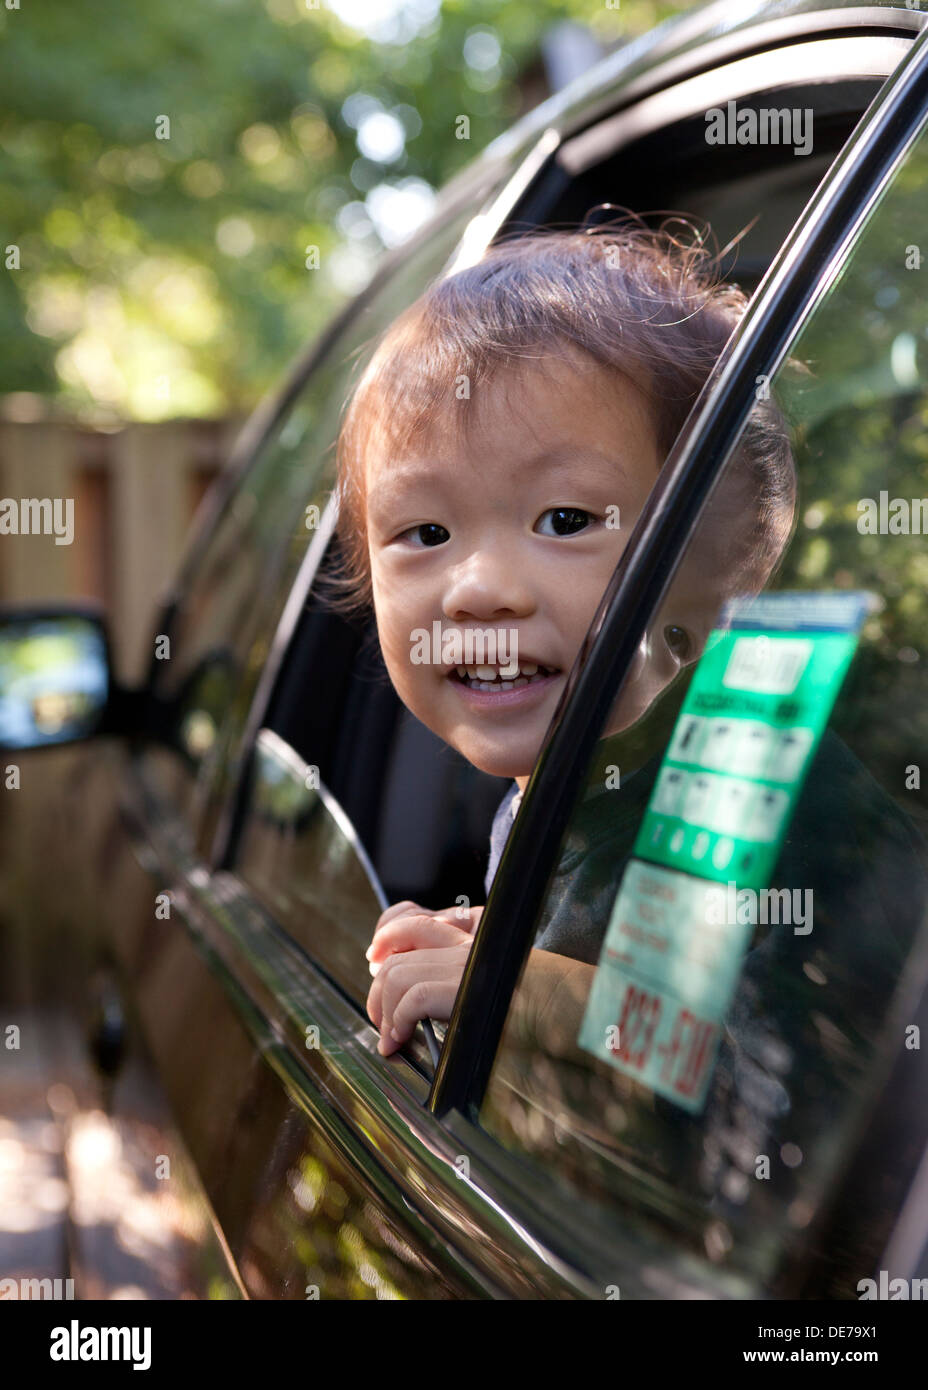 Asian baby boy looking out of car window Banque D'Images